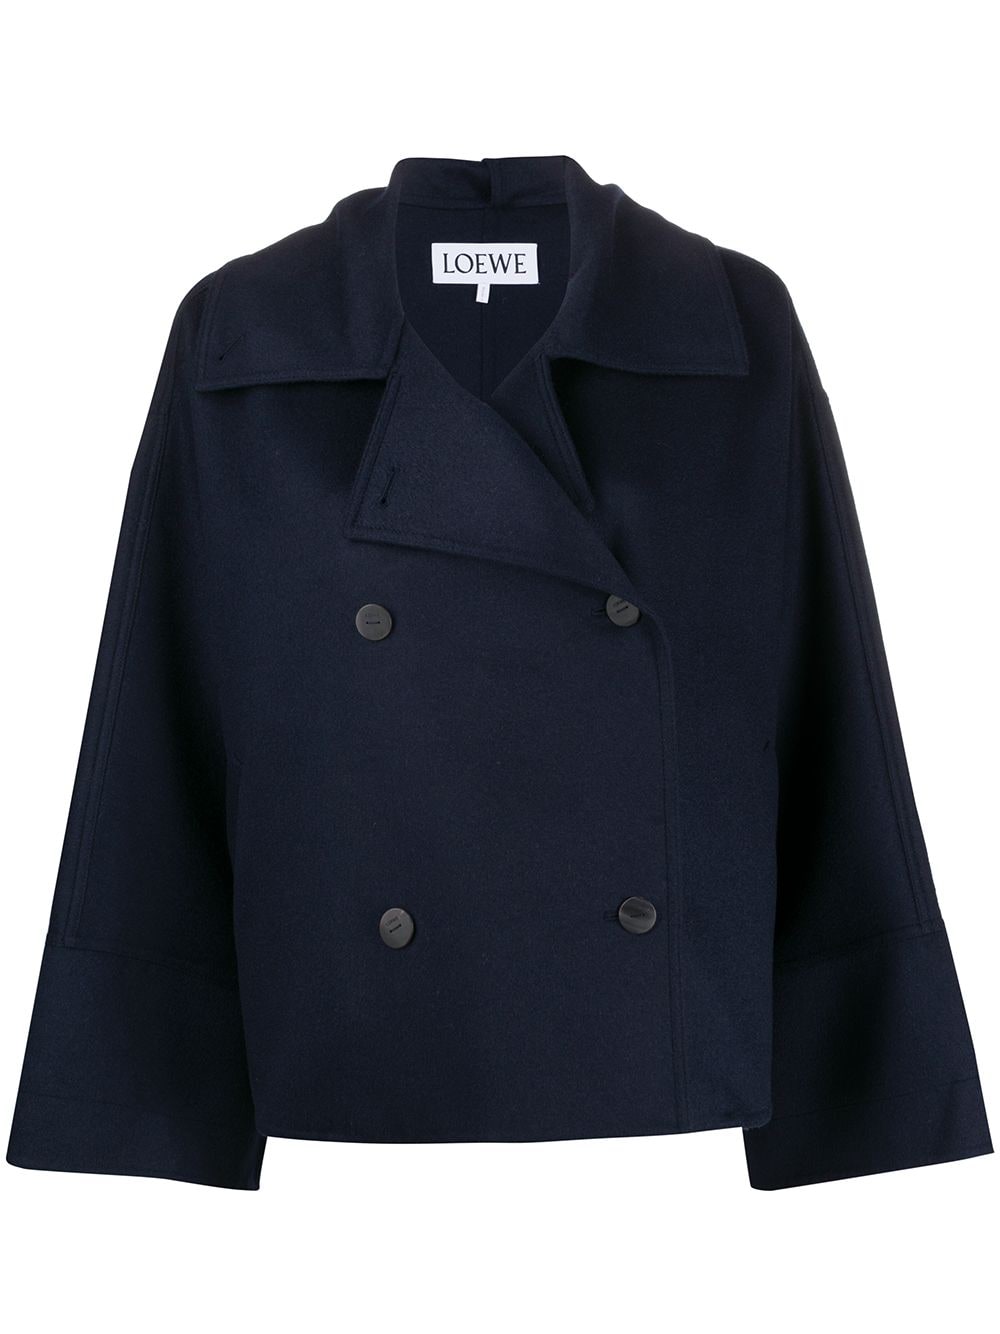 Loewe Double Breasted Boxy Peacoat In Blue